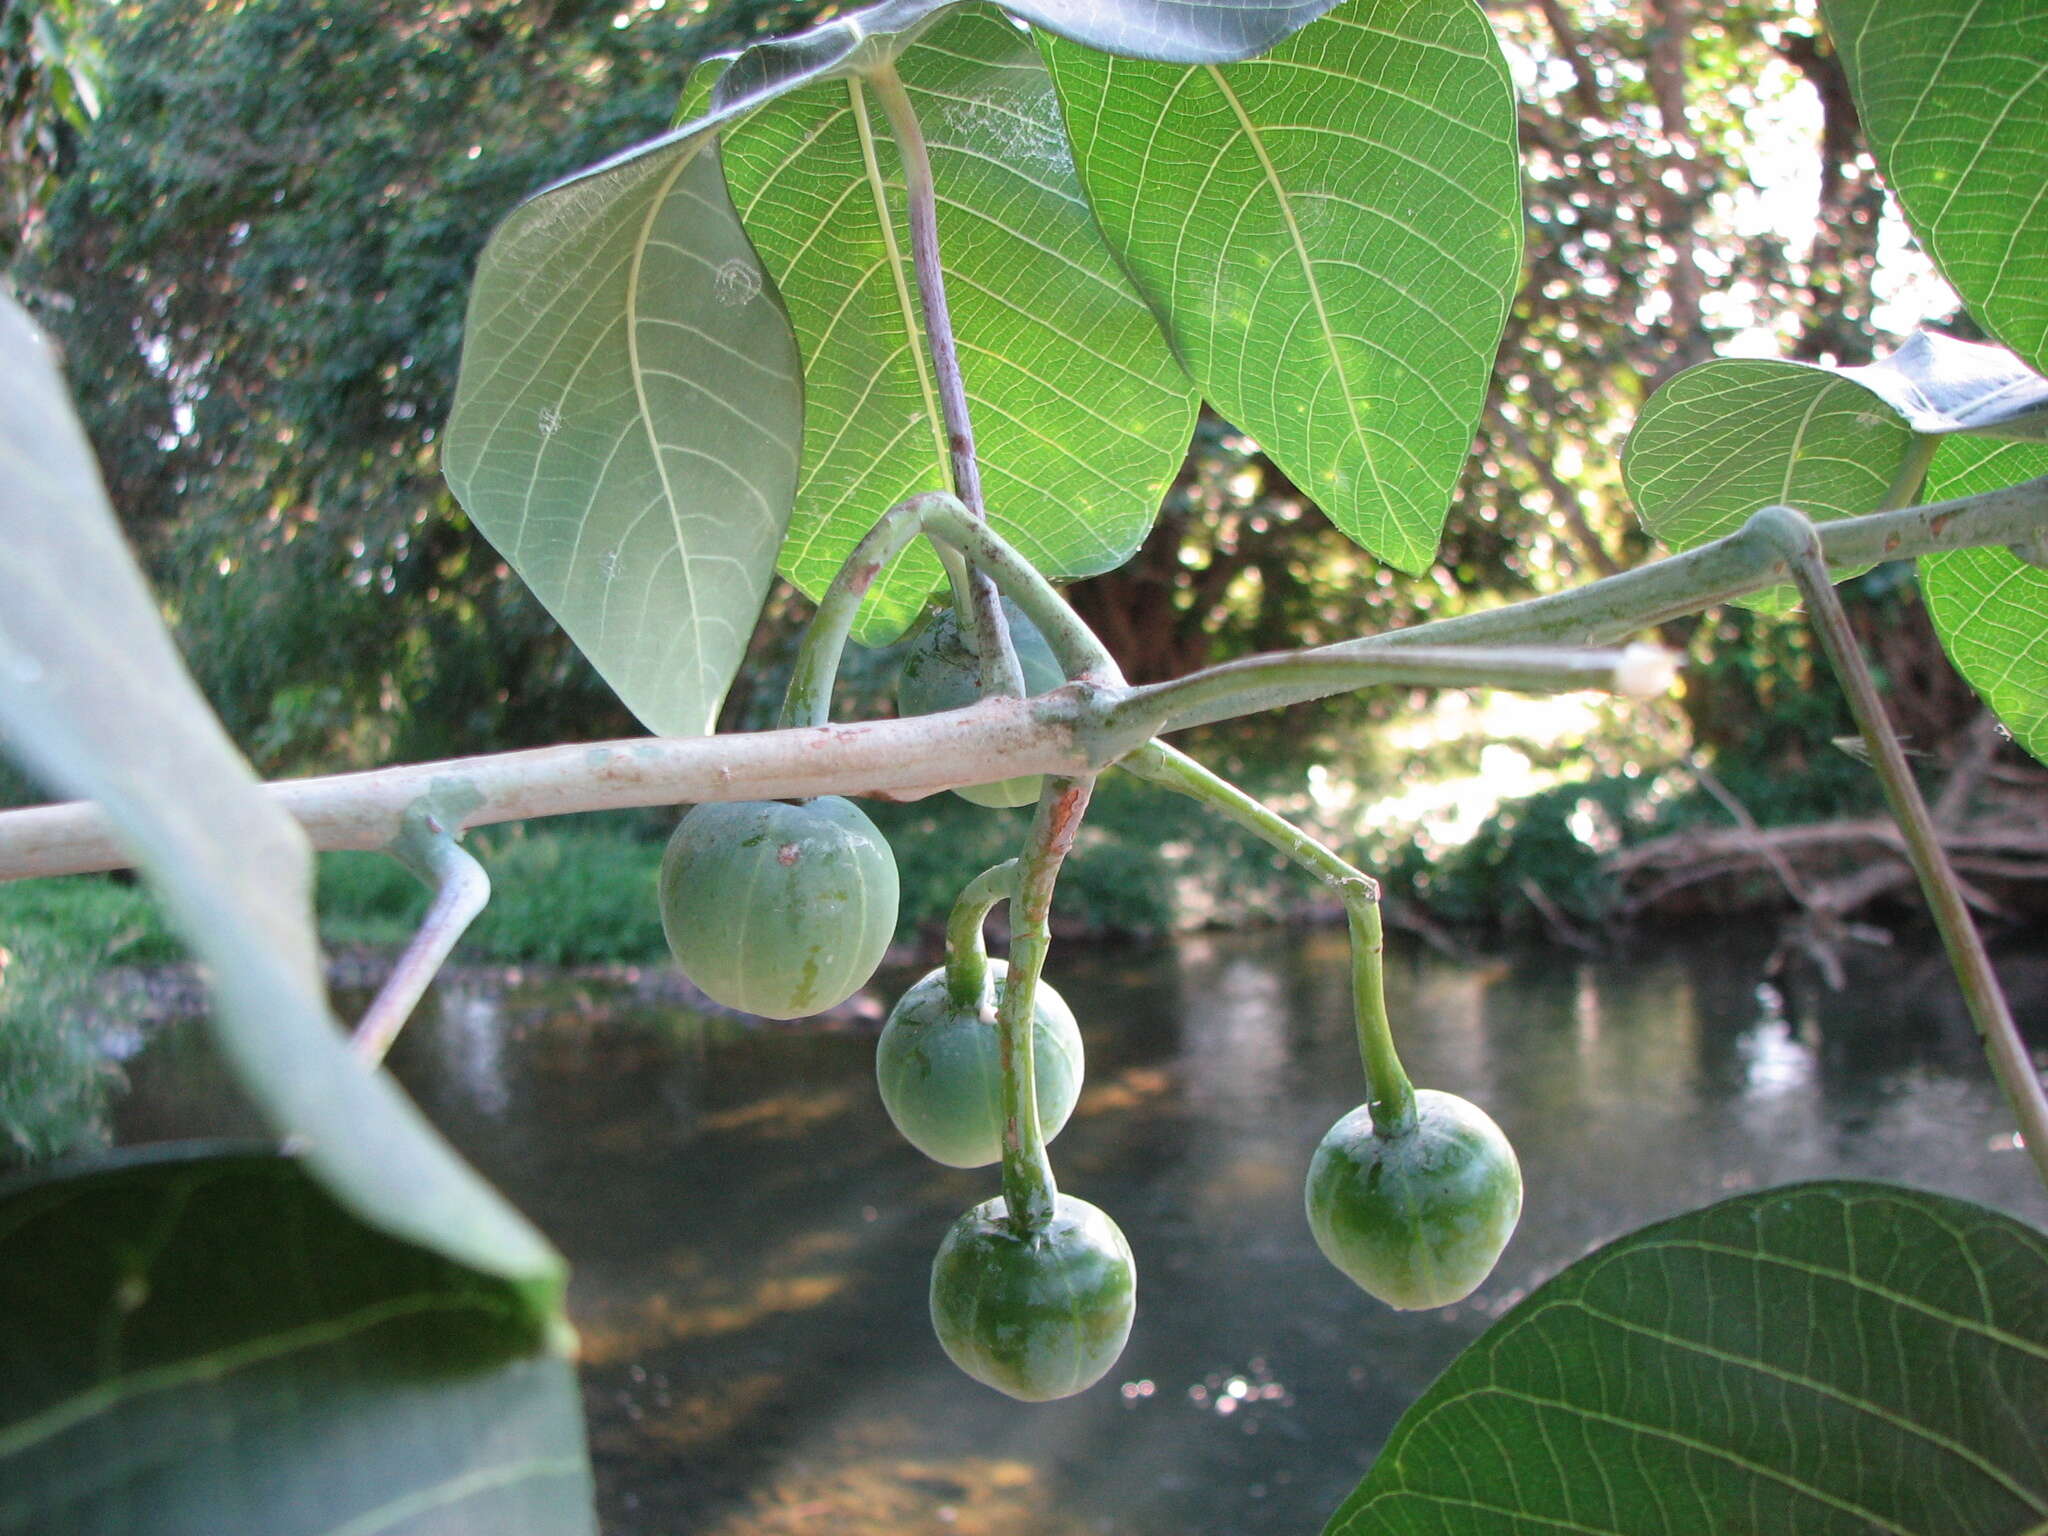 Image of ceara rubbertree